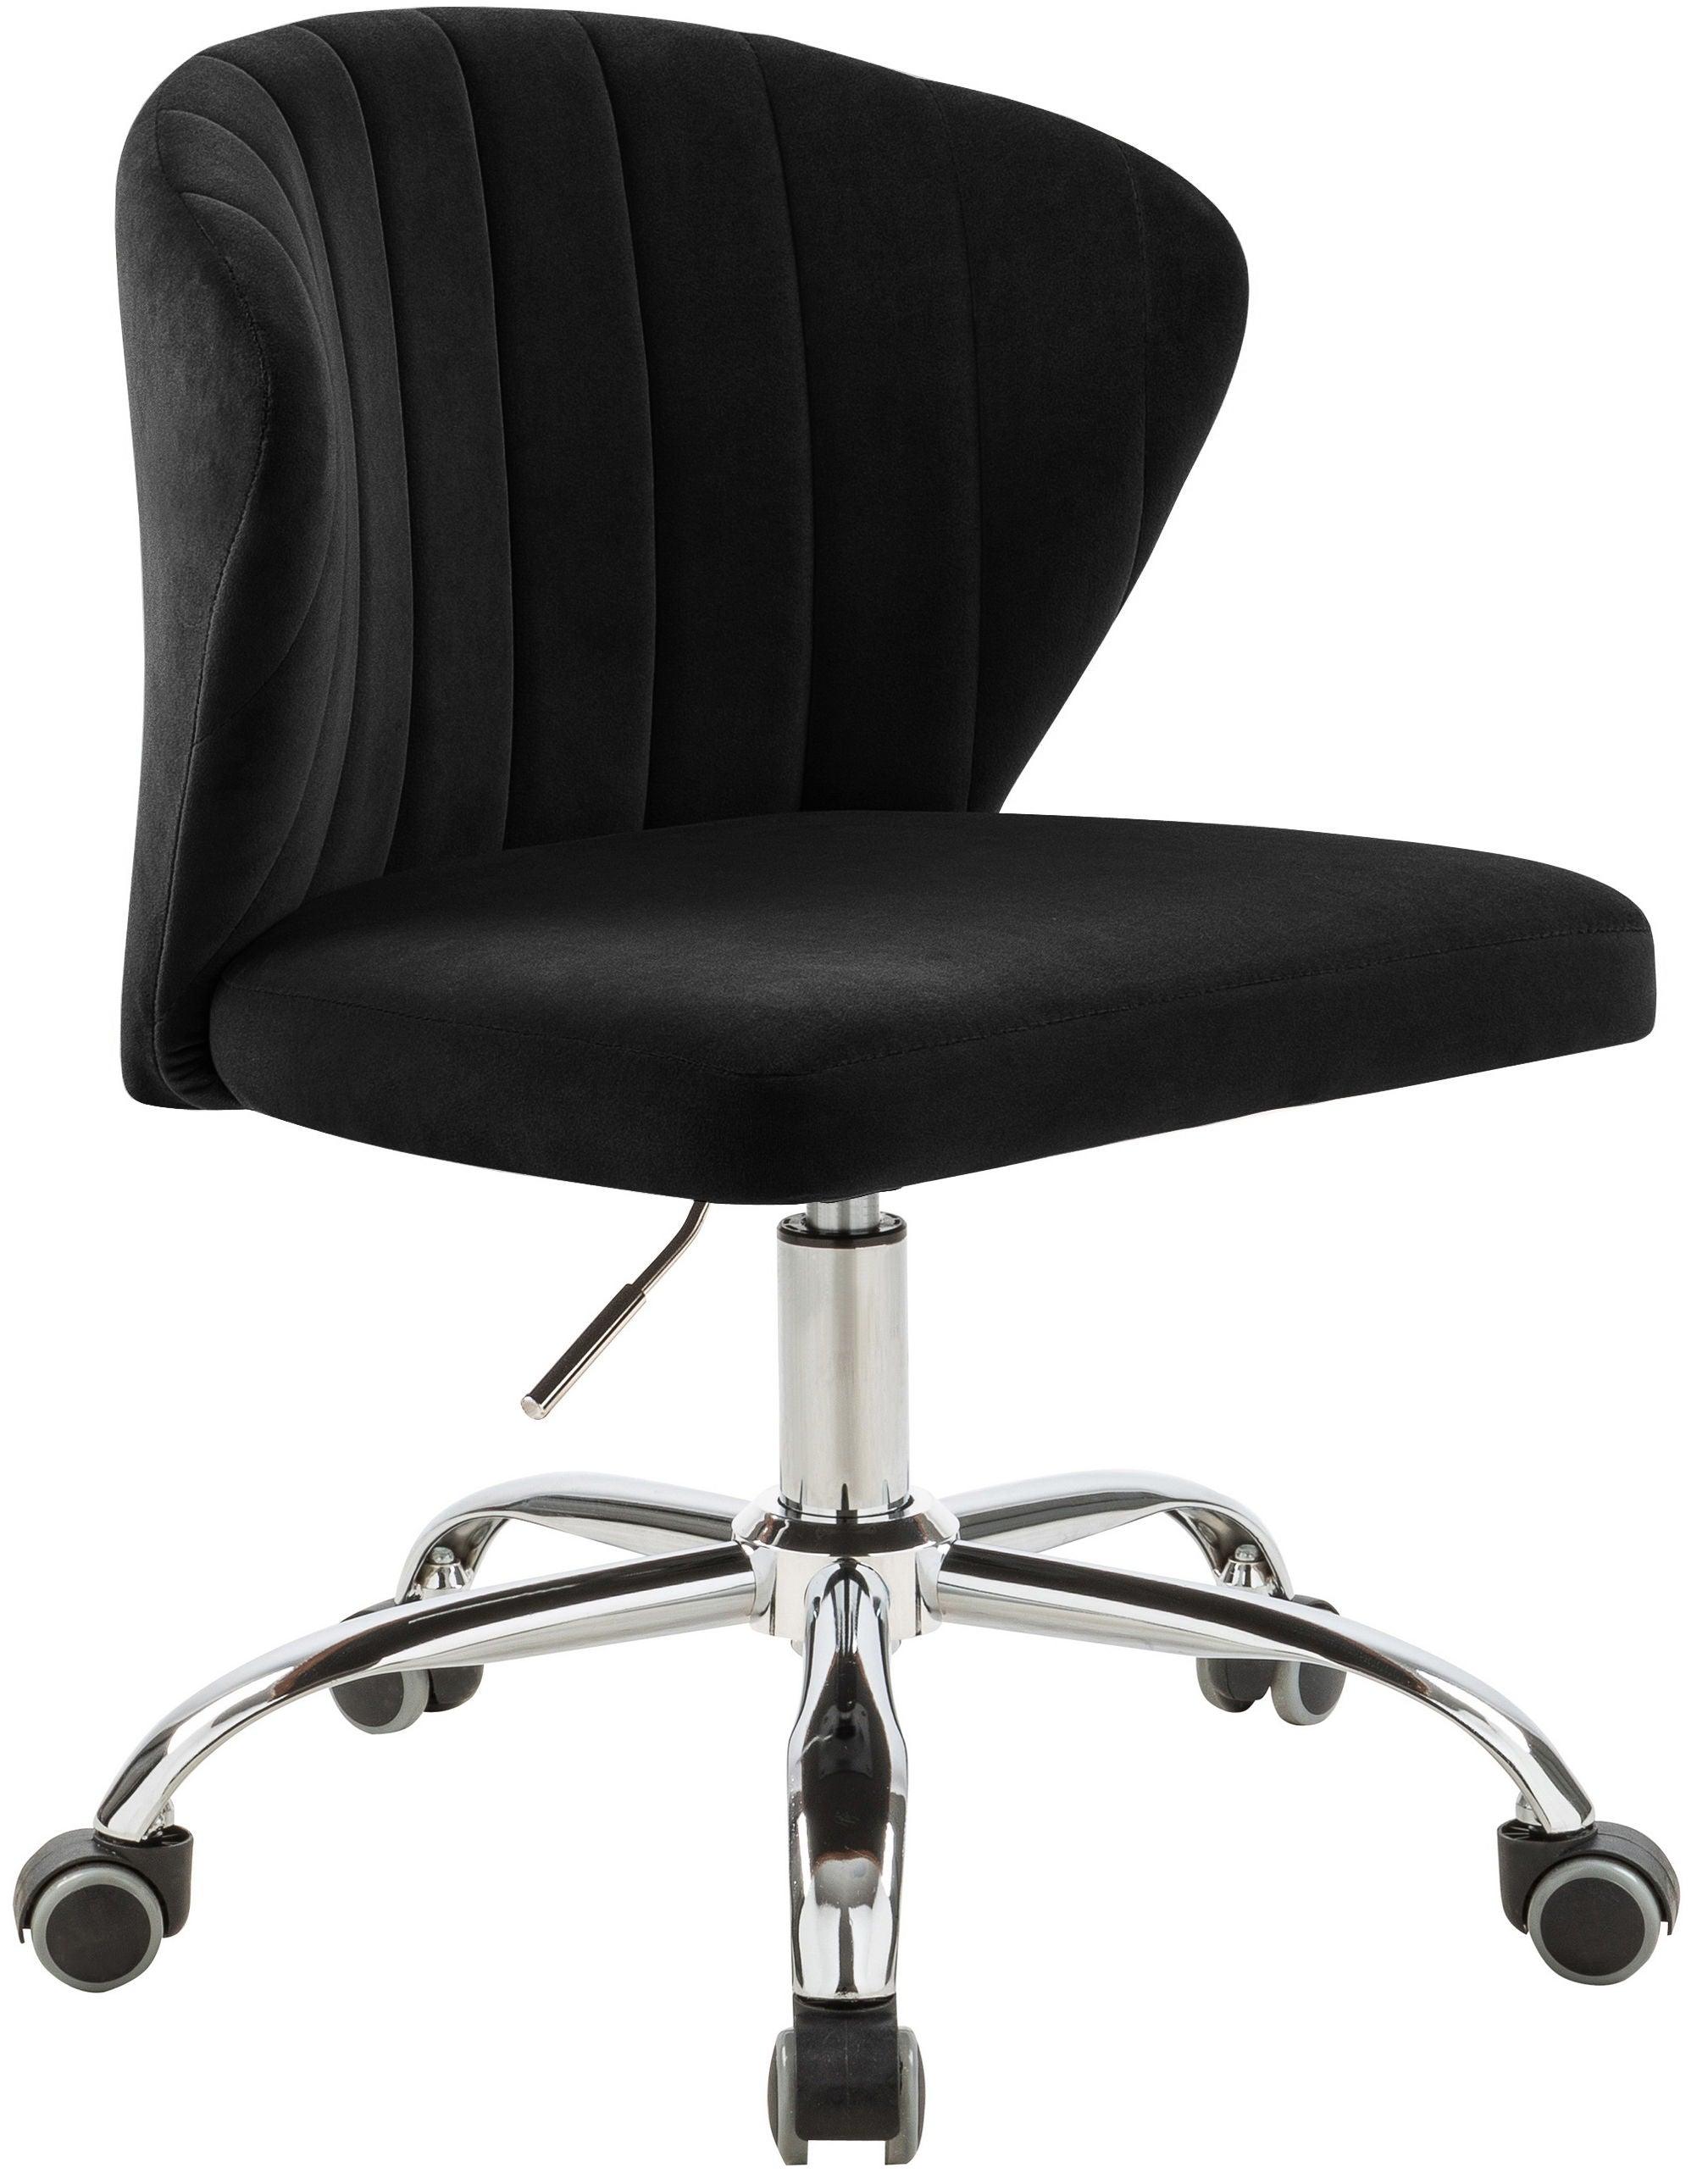 Meridian Furniture - Finley - Office Chair with Chrome Legs - 5th Avenue Furniture